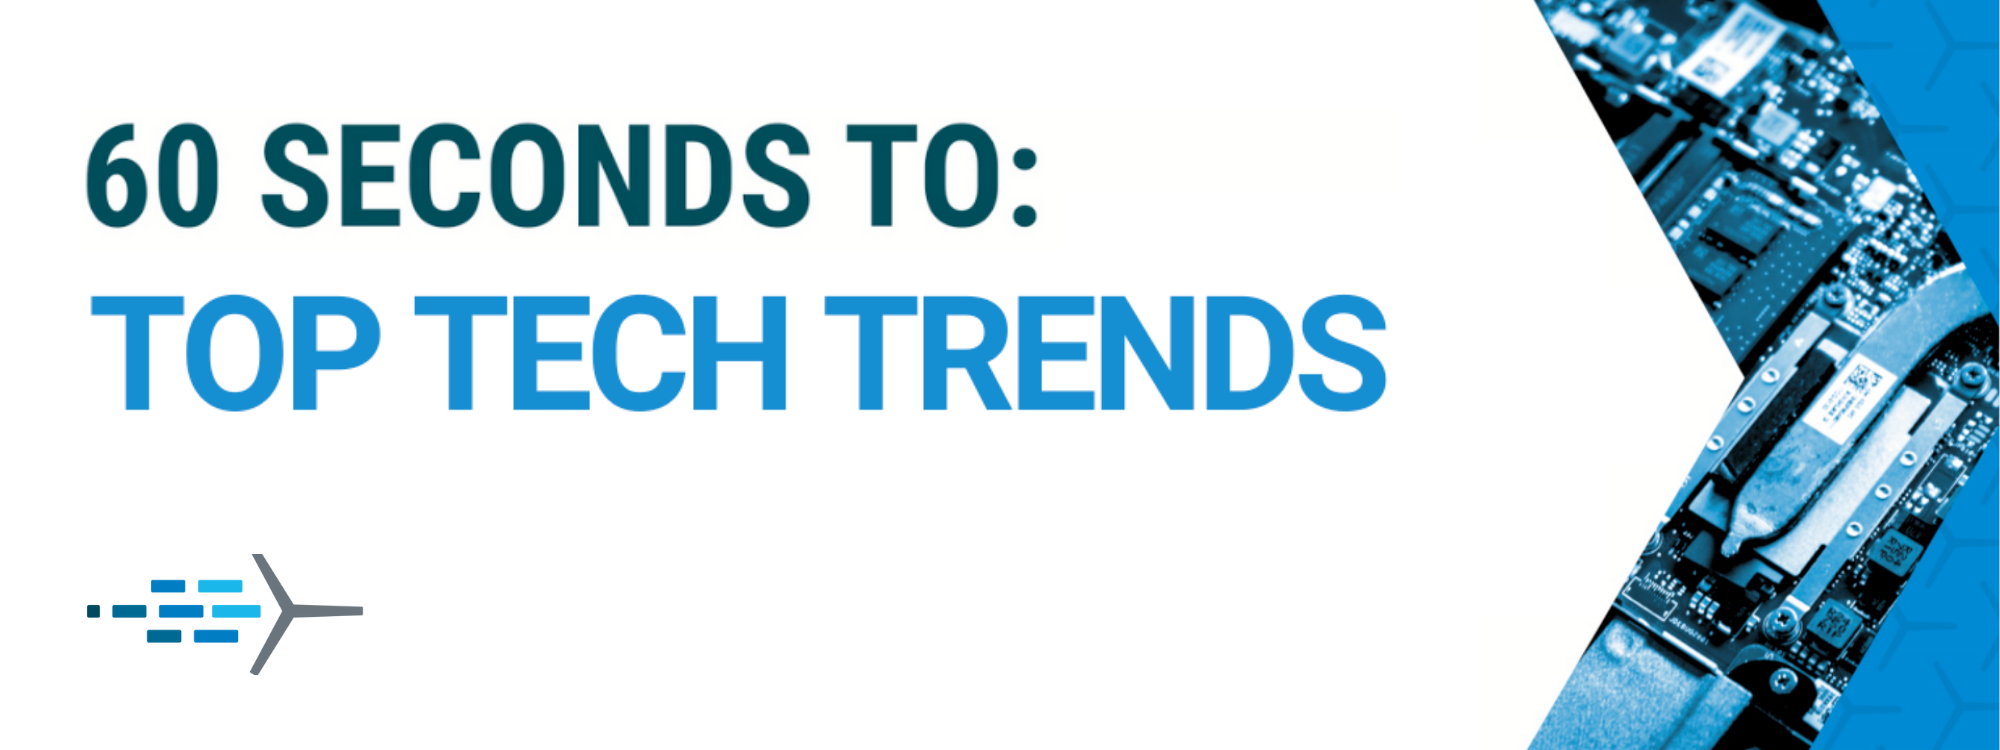 60 Seconds to: Top Tech Trends